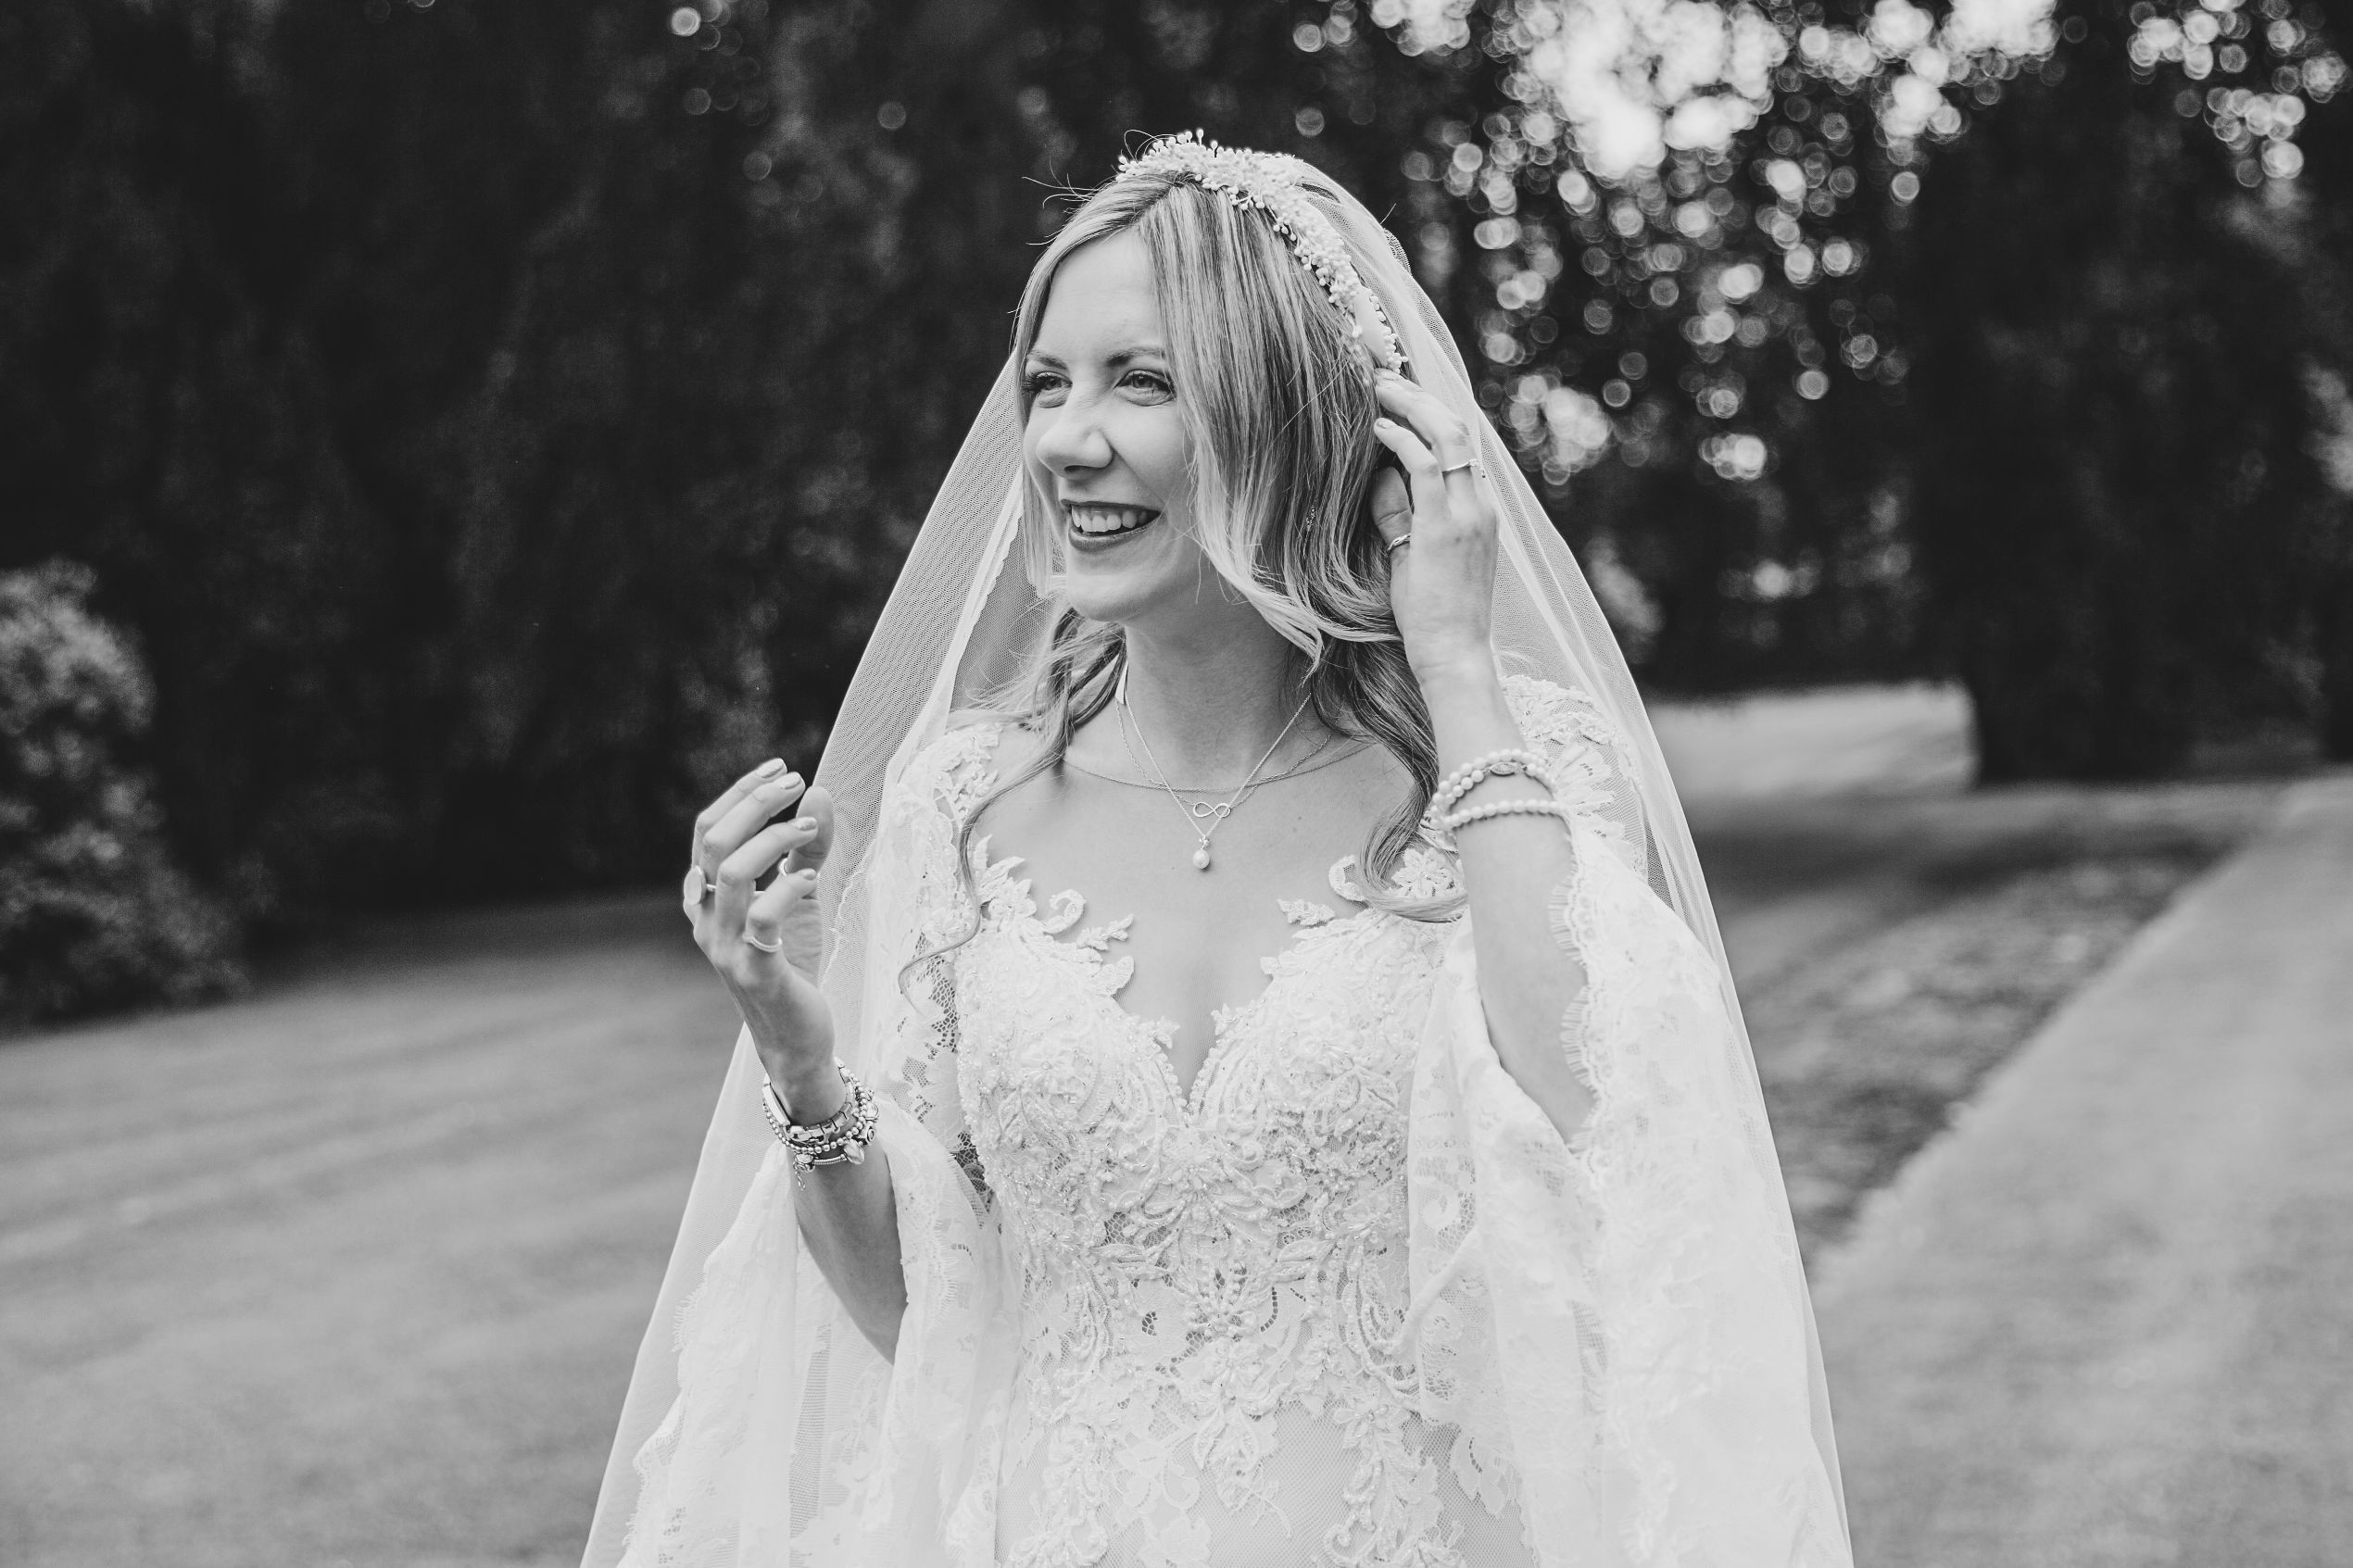 Beautiful Bride in lacey wedding dress and beautiful bridal veil